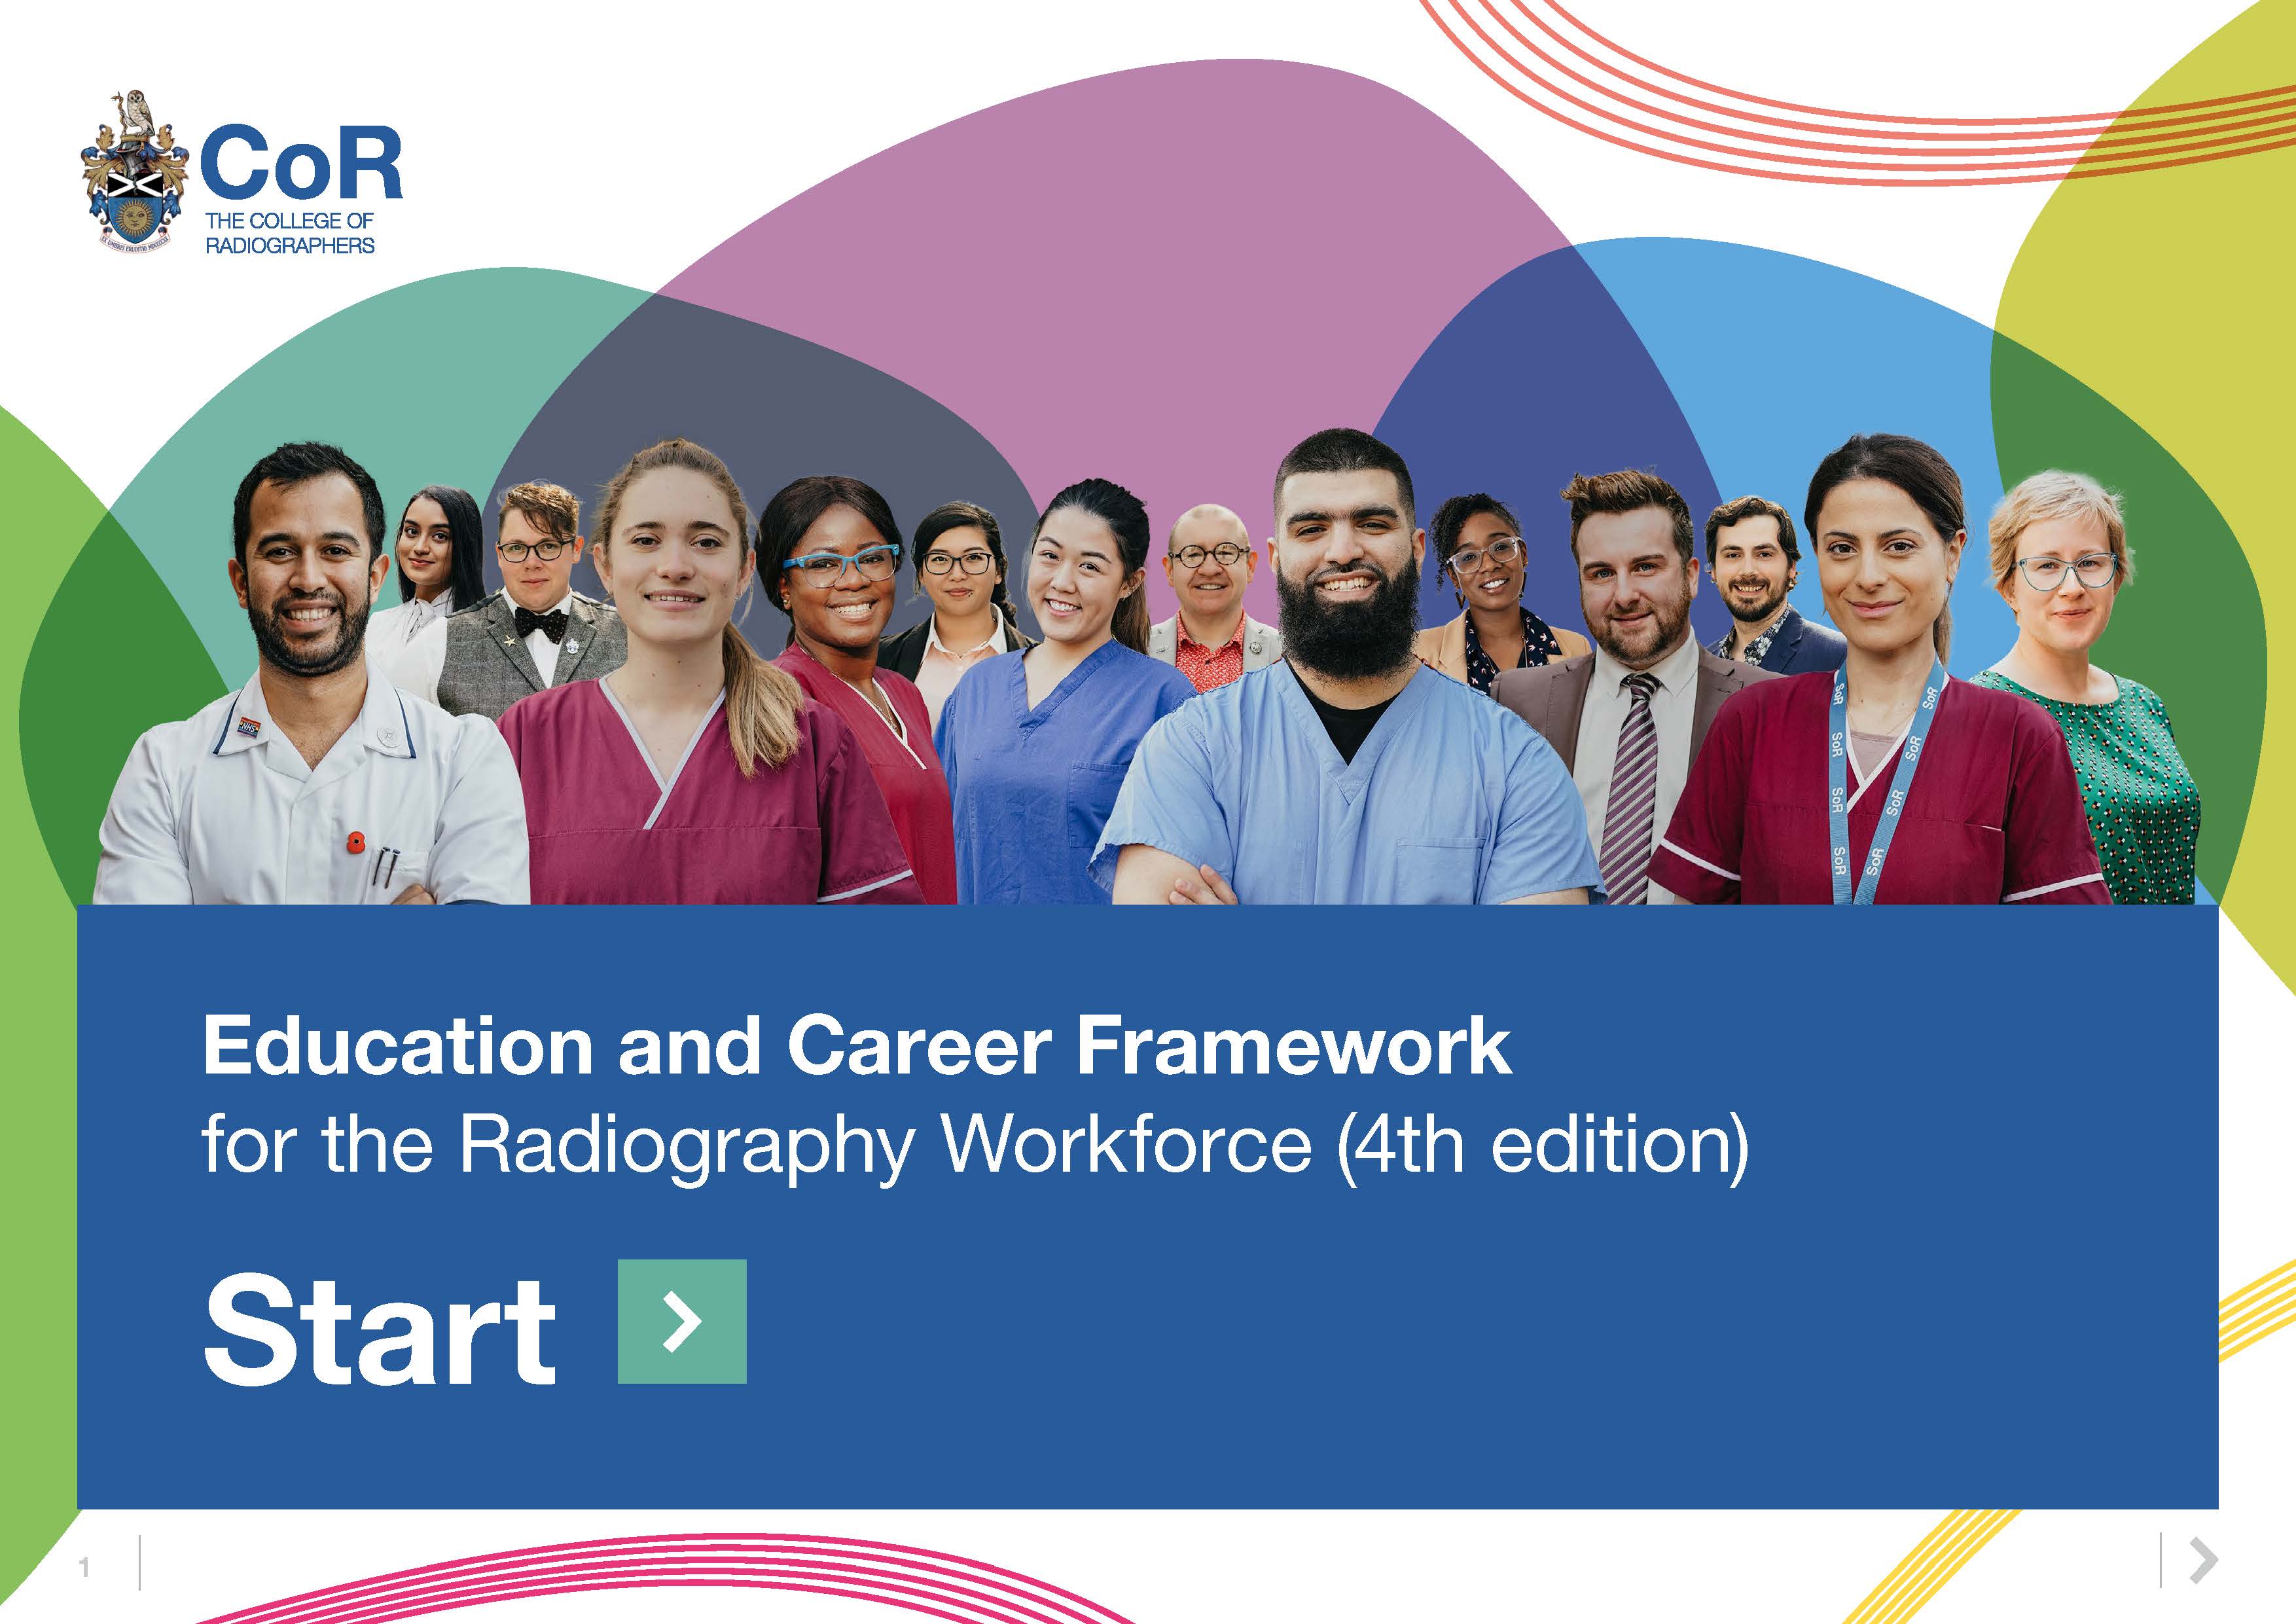 Education and Career Framework for the Radiography Workforce